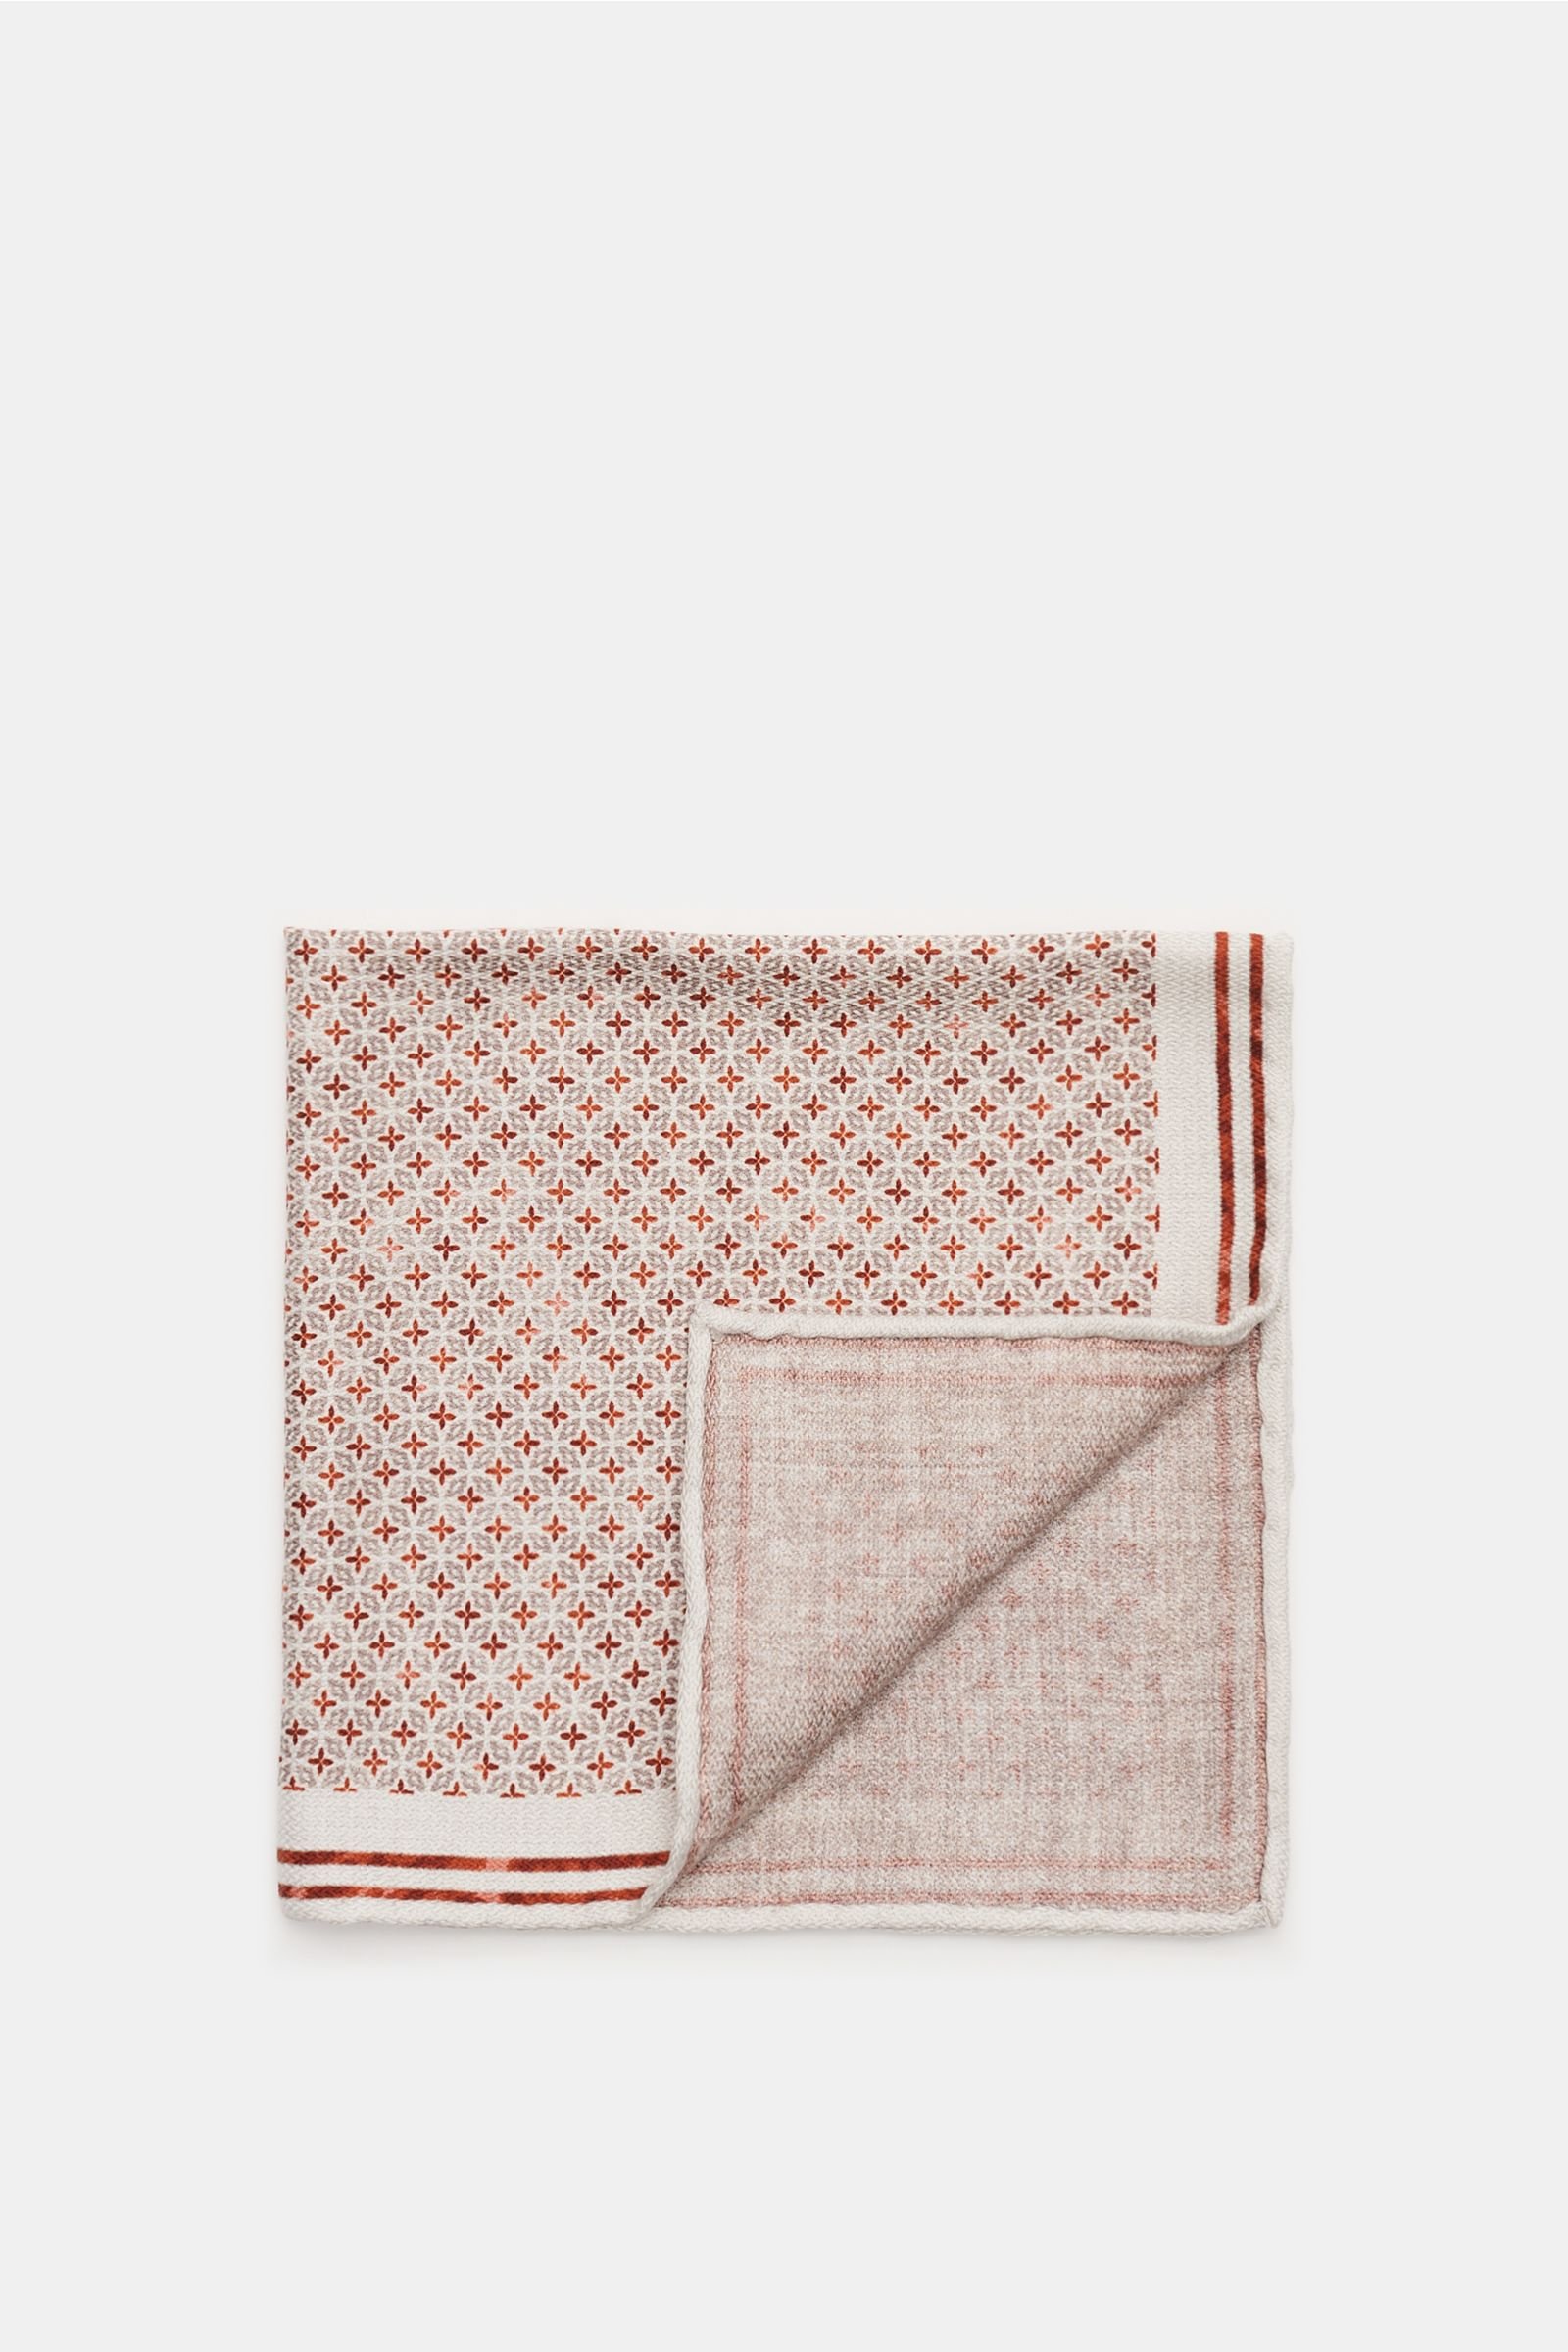 Pocket square off-white/rust-red patterned